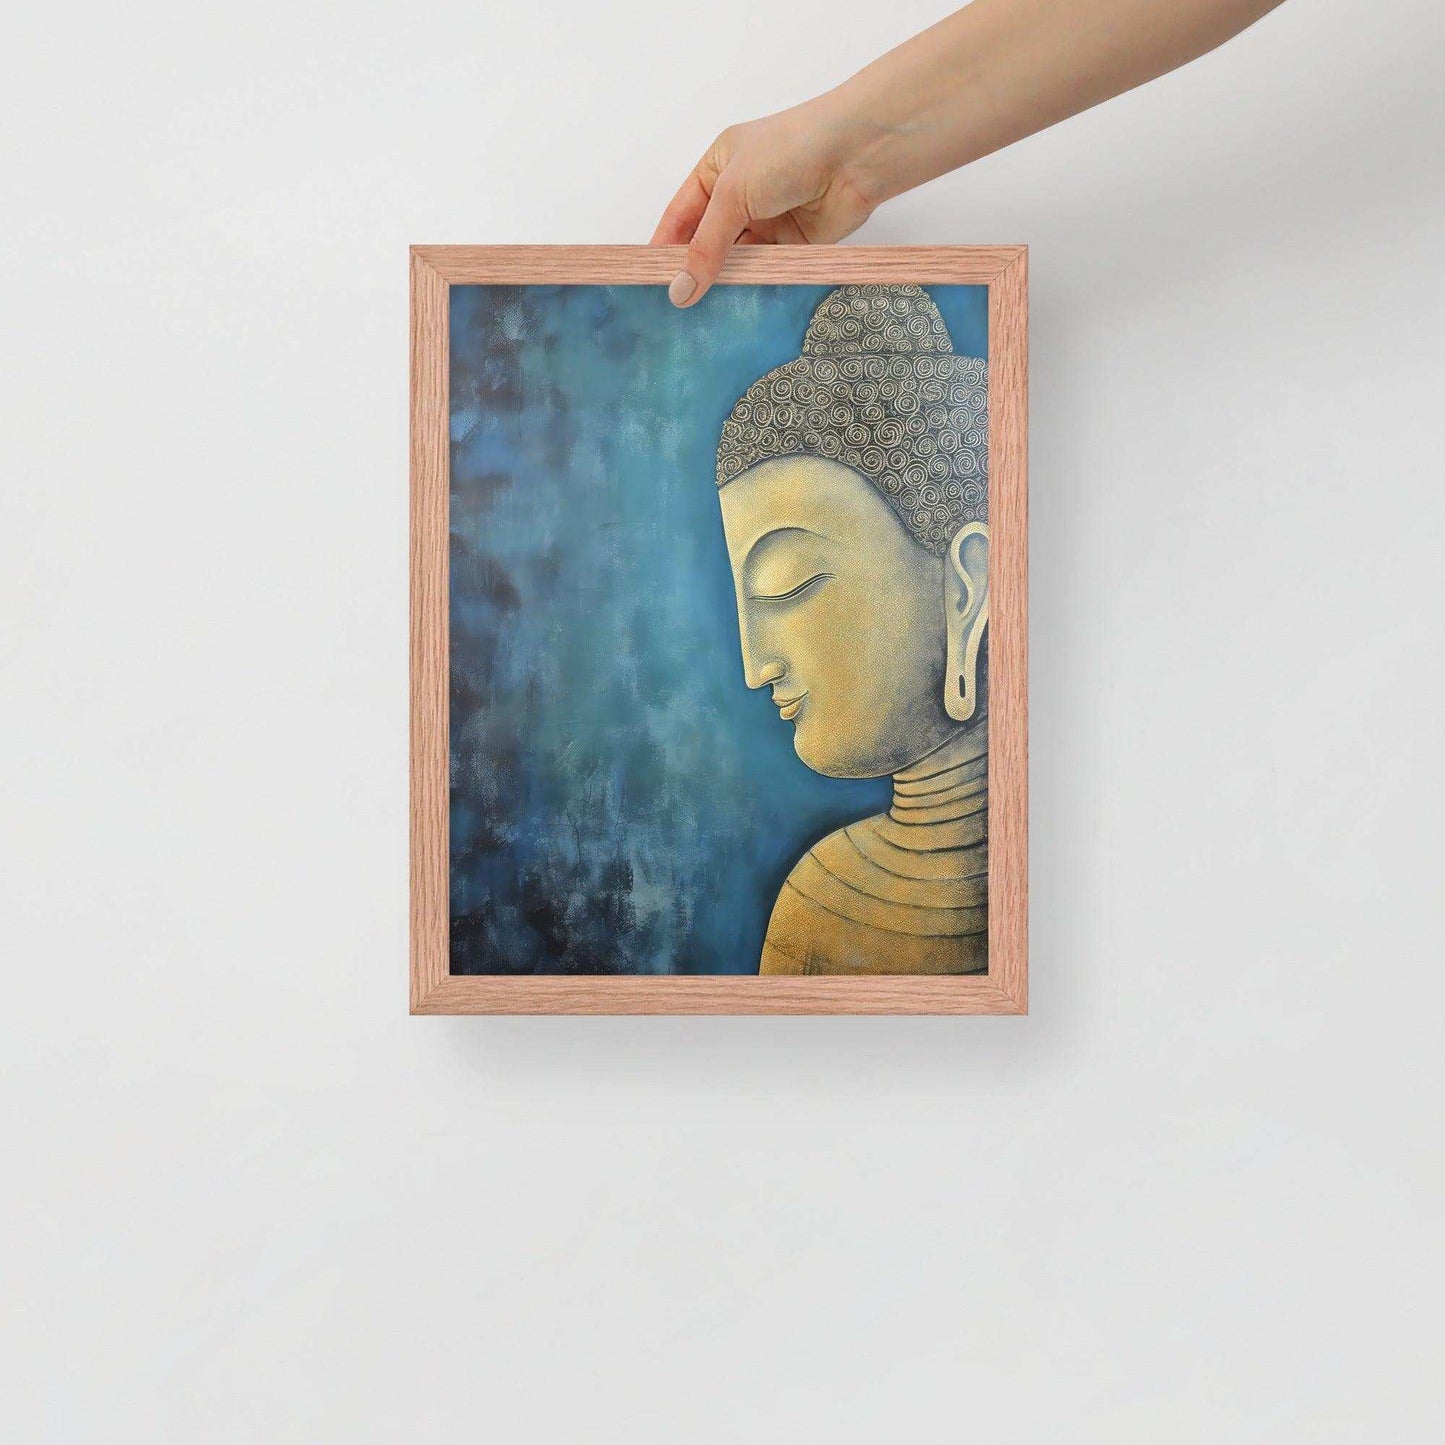 A hand is placing a framed poster on a white background, where a serene Golden Buddha Art with a patterned head and golden features is portrayed in profile against a mottled blue backdrop, all within a red oak frame.